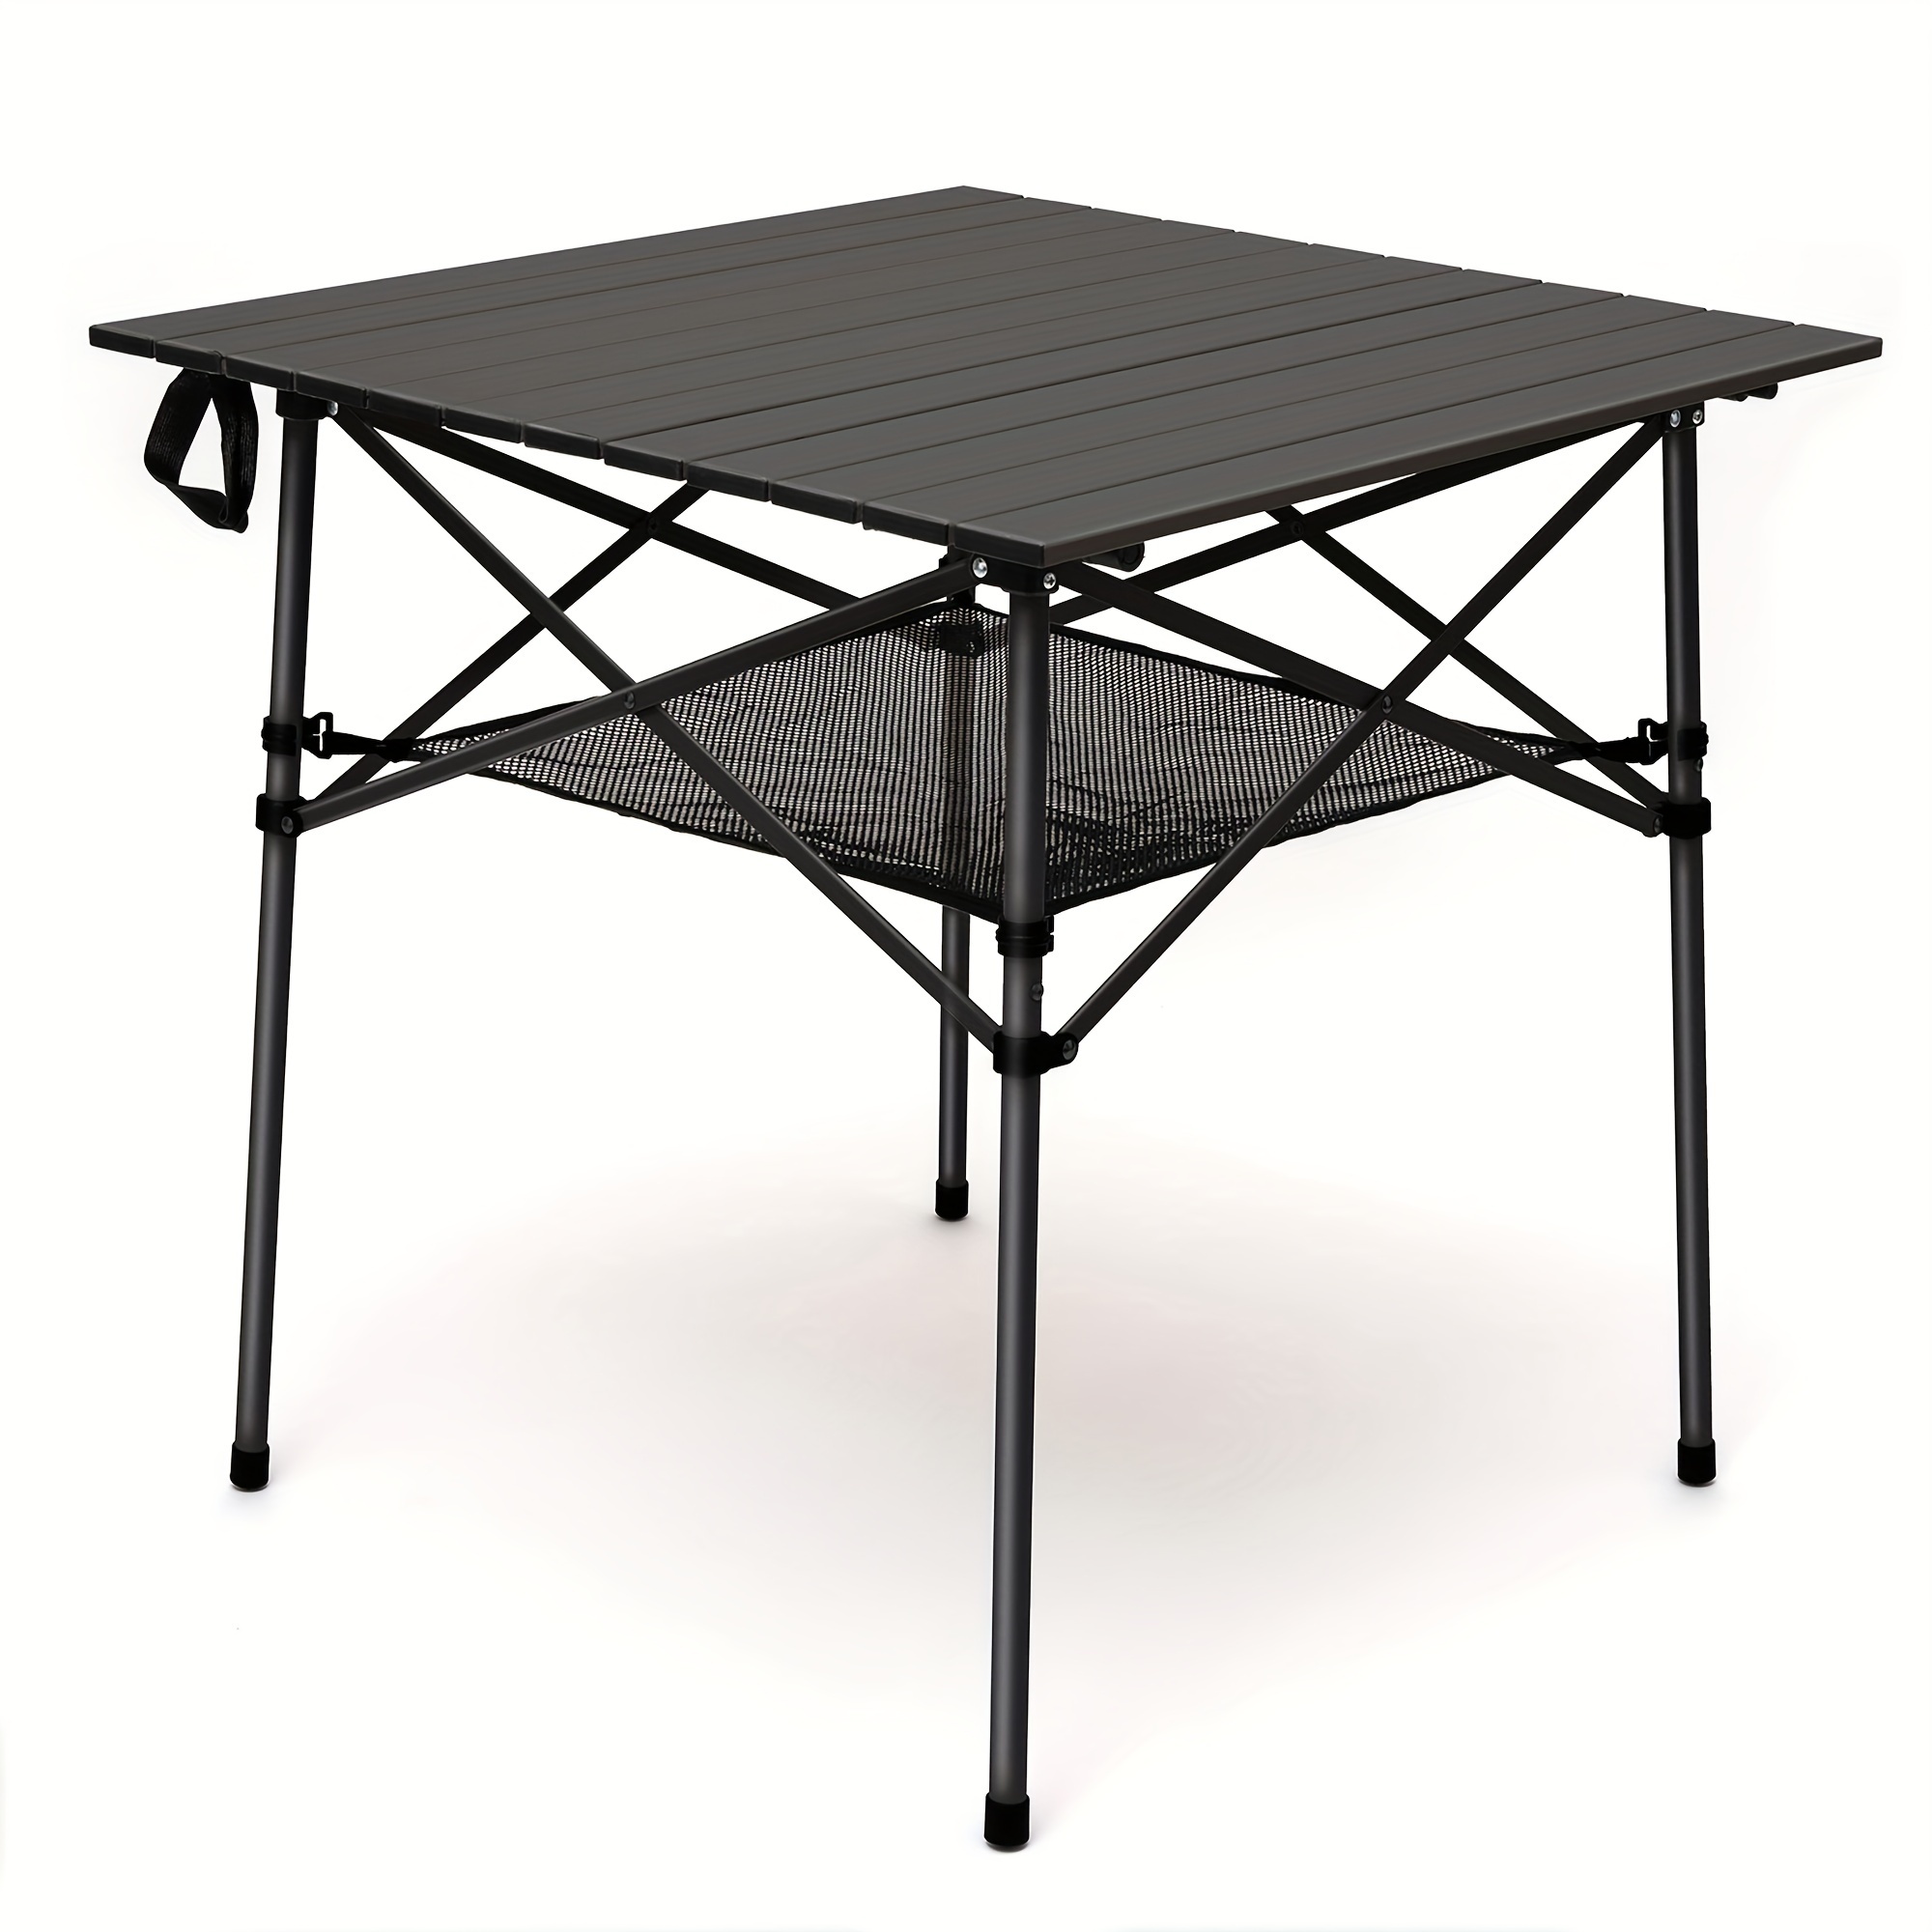 

Sunnyfeel Outdoor Folding Table | Lightweight Compact Aluminum Camping Table, Roll Up Top 4 People Portable Camp Square Tables With Carry Bag For Picnic/cooking/beach/travel/bbq